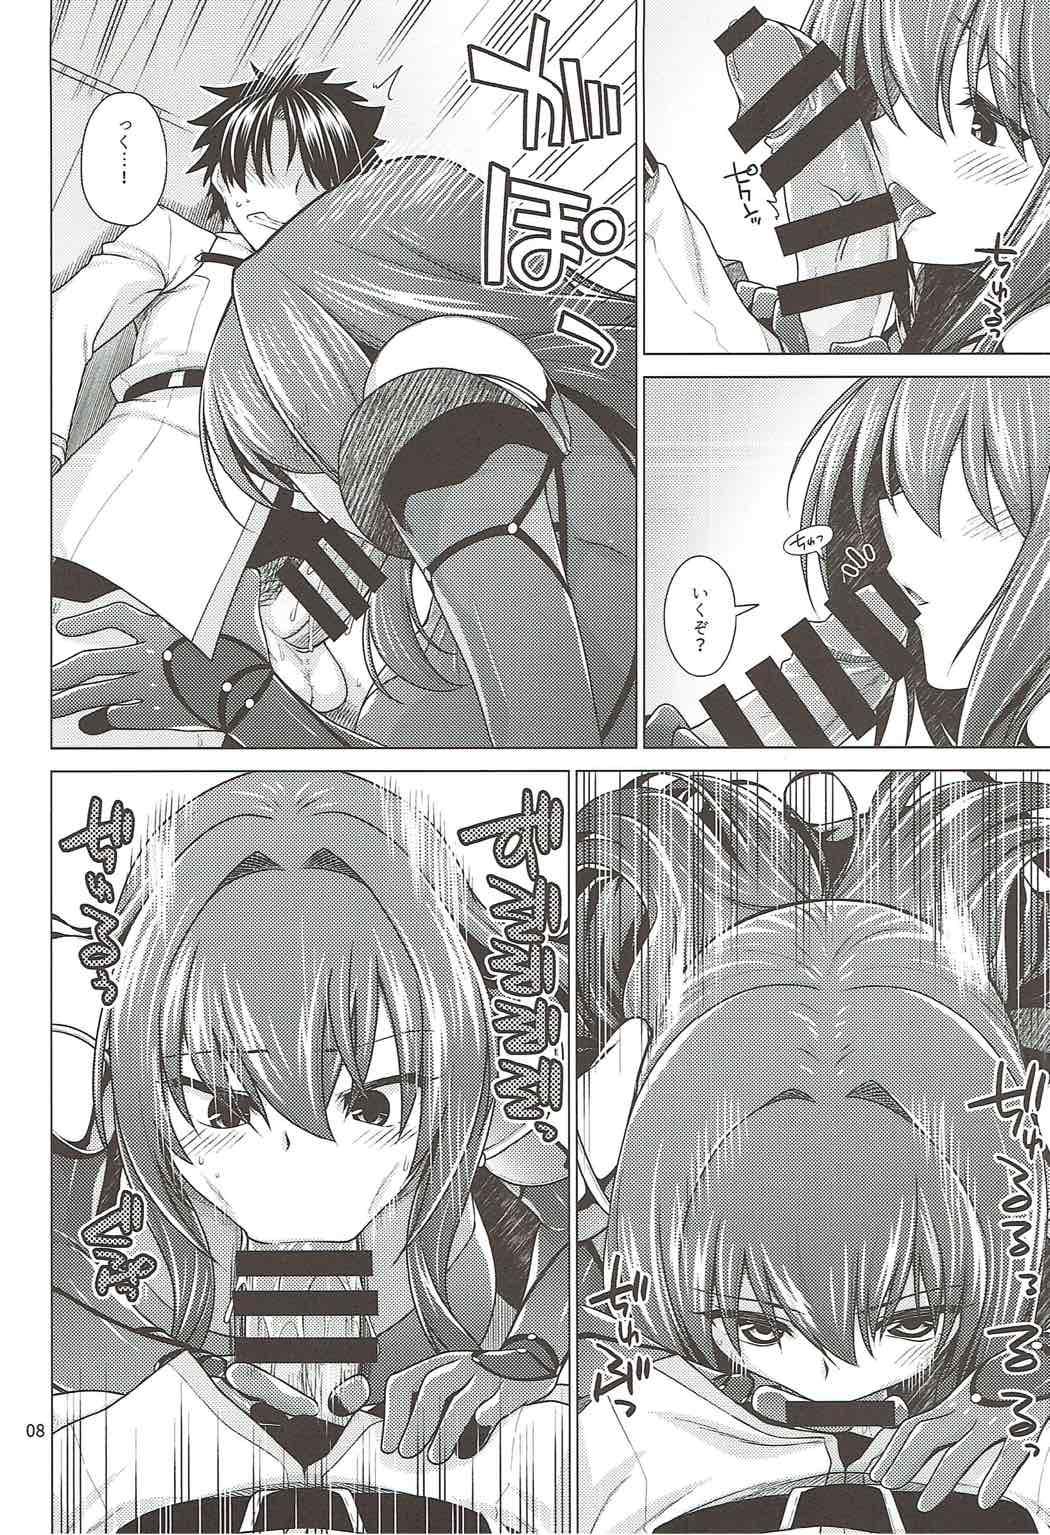 Monstercock Scathach Shishou to Celt Shiki Gachihamex! - Fate grand order Hotwife - Page 7